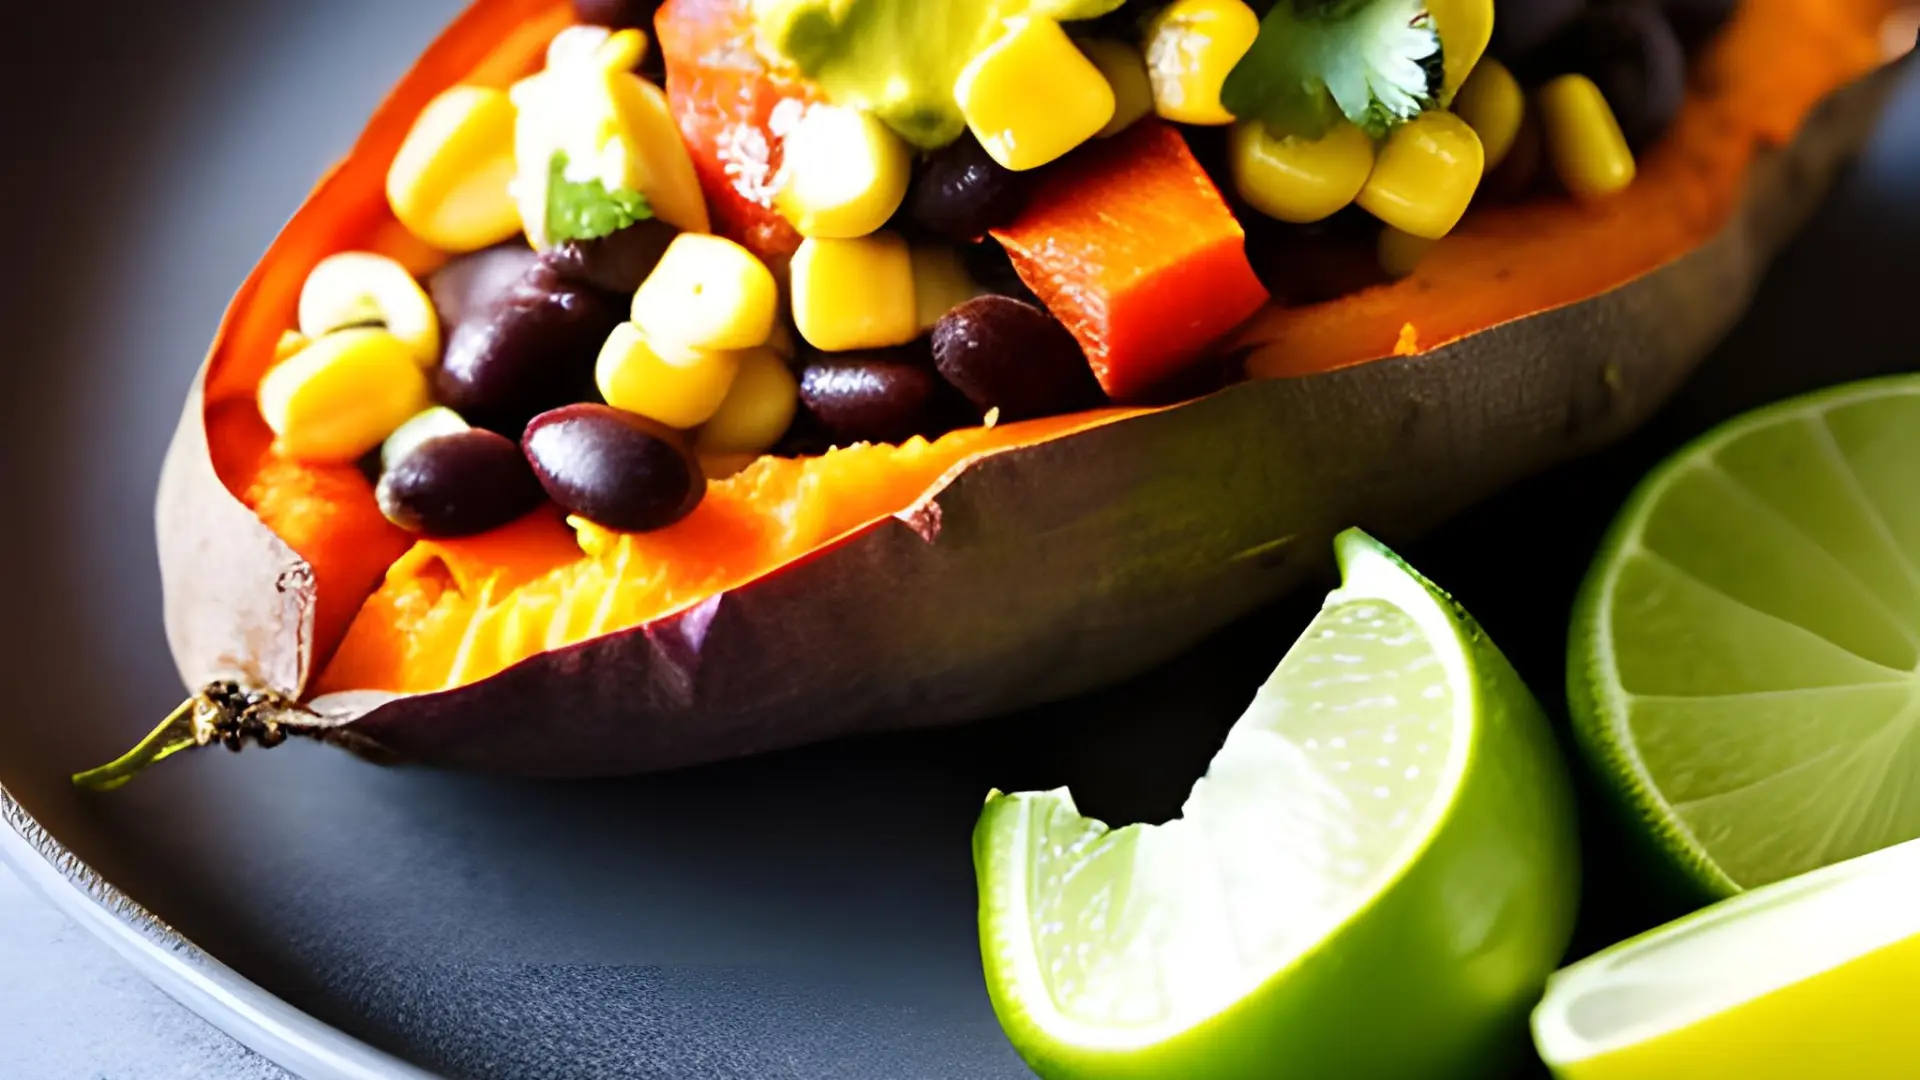 Baked Sweet Potato with Black Bean and Corn Salsa